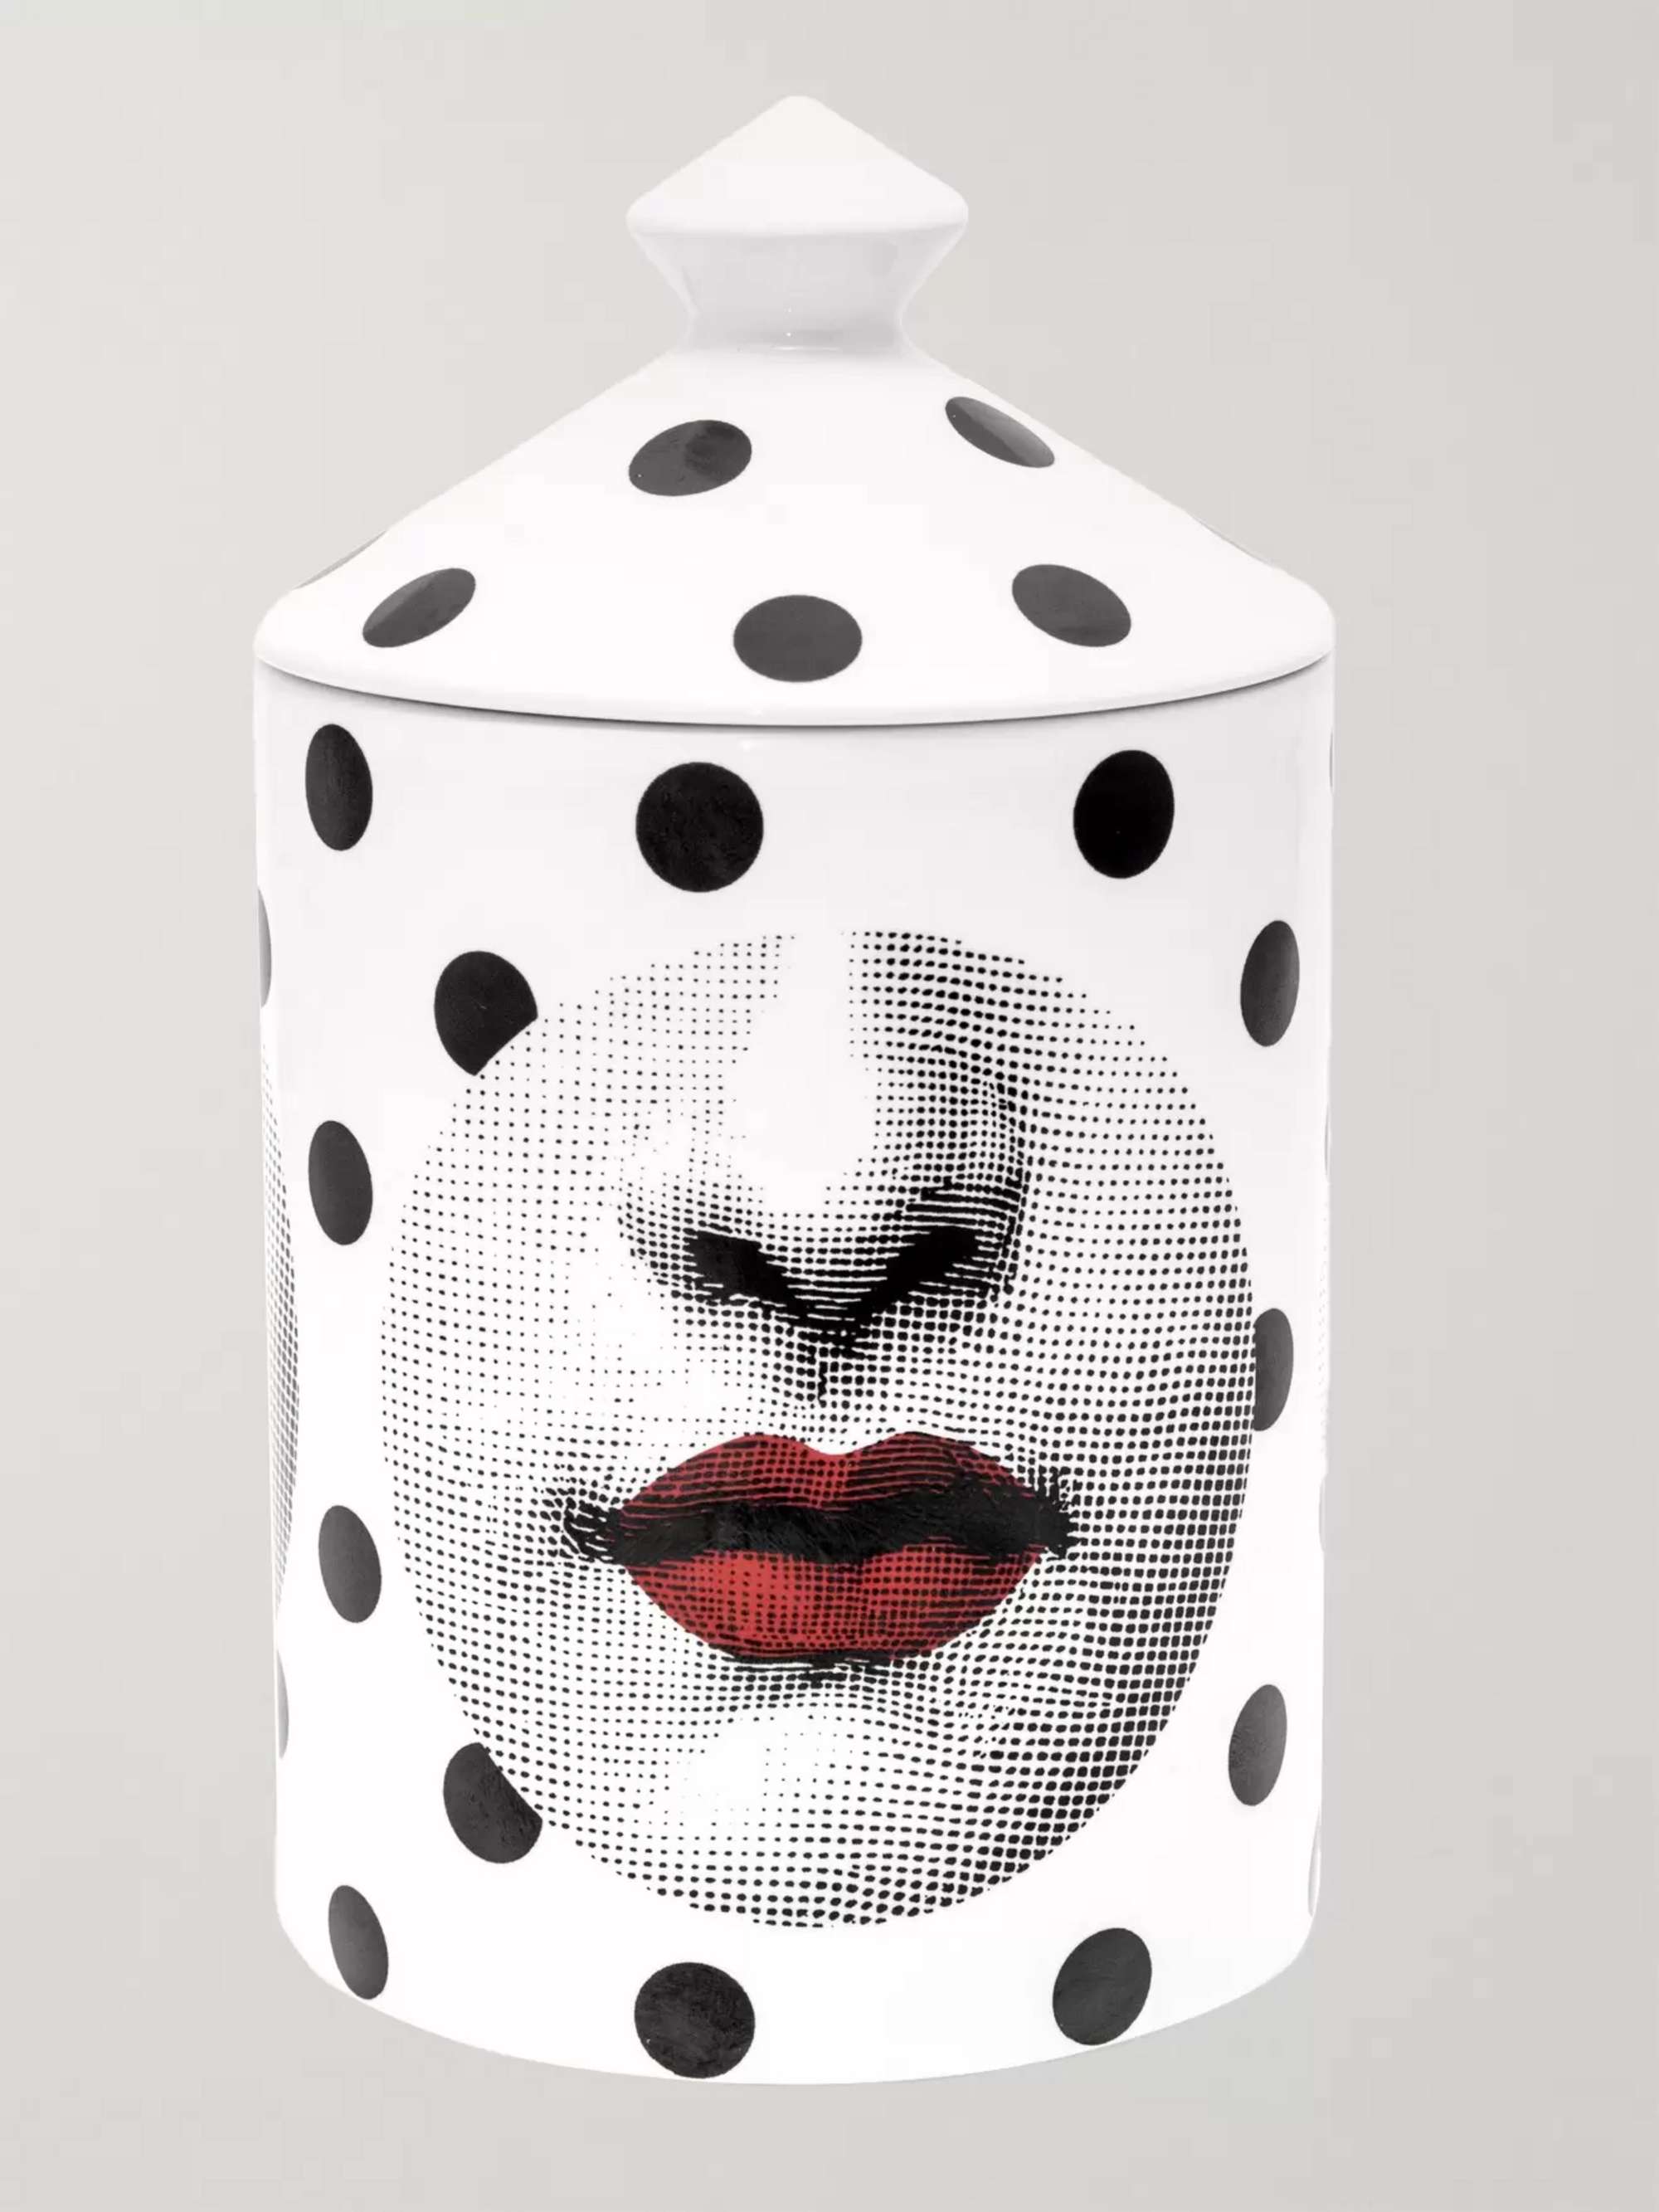 FORNASETTI Comme des Fornà Scented Candle, 300g